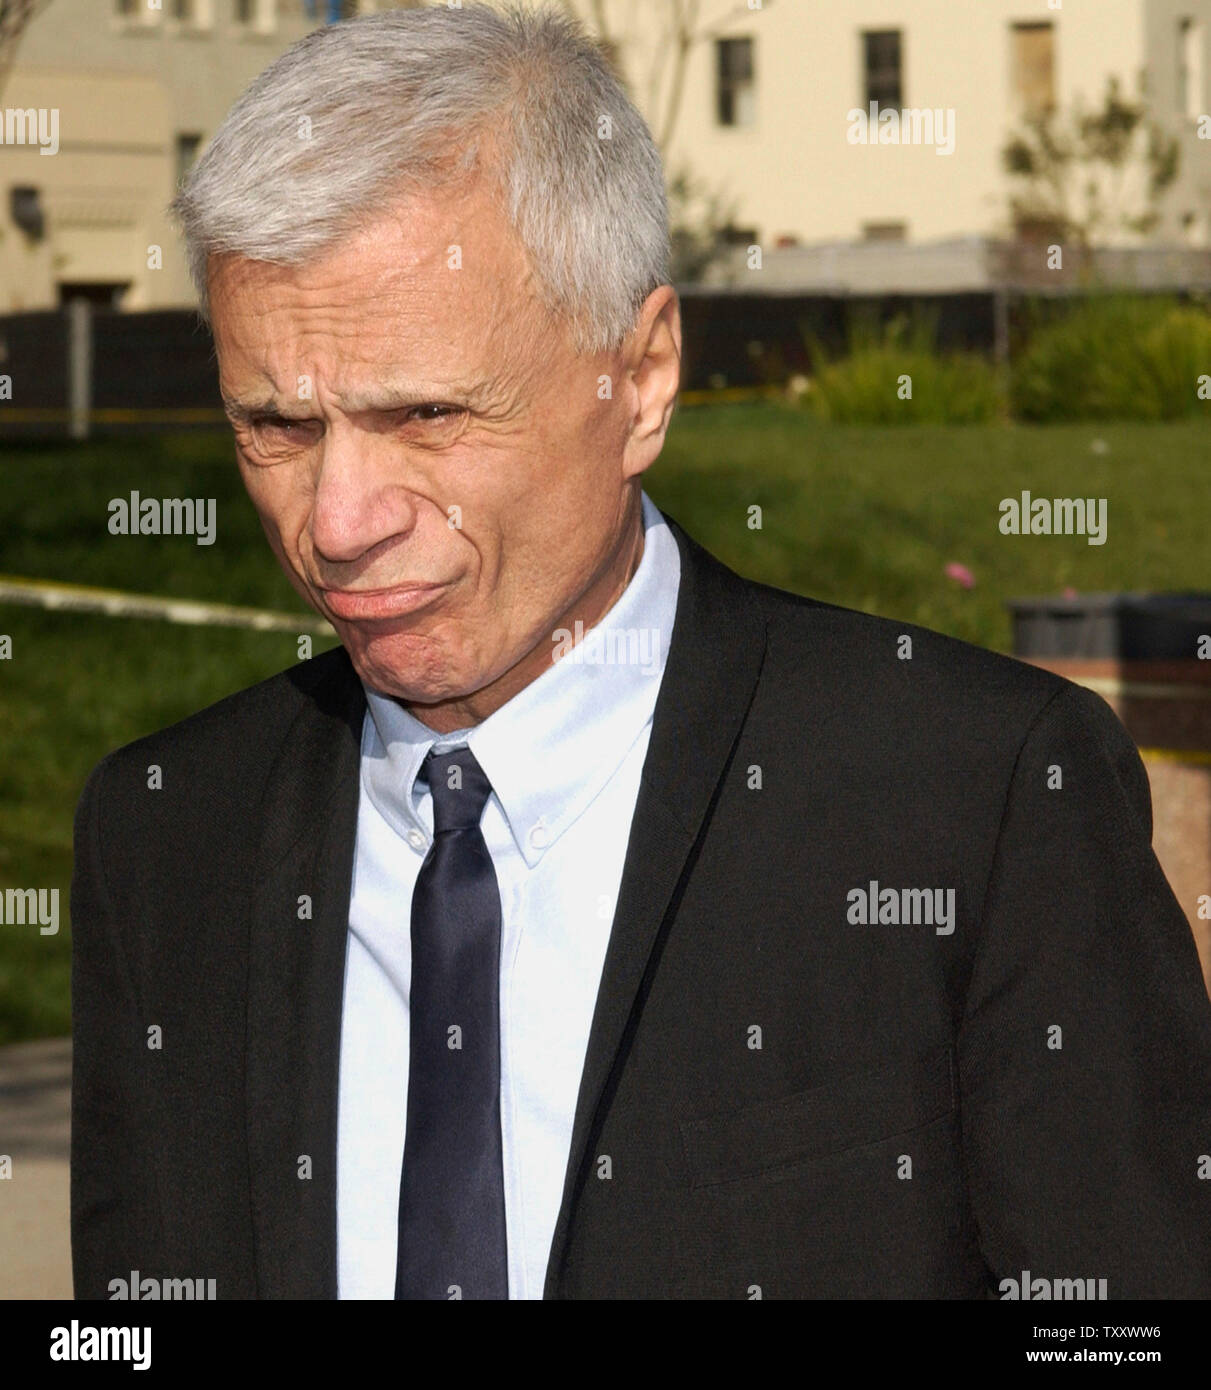 Actor Robert Blake departs the Van Nuys courthouse after attending a court session in his murder trial, in Los Angeles March 15, 2005. Jurors in 'Baretta' star Robert Blake's murder trial continue after more than a week of deliberations without a verdict, increasing speculation they may deadlock over whether the actor shot and killed his wife outside his favorite restaurant.    (UPI Photo/Jim Ruymen) Stock Photo